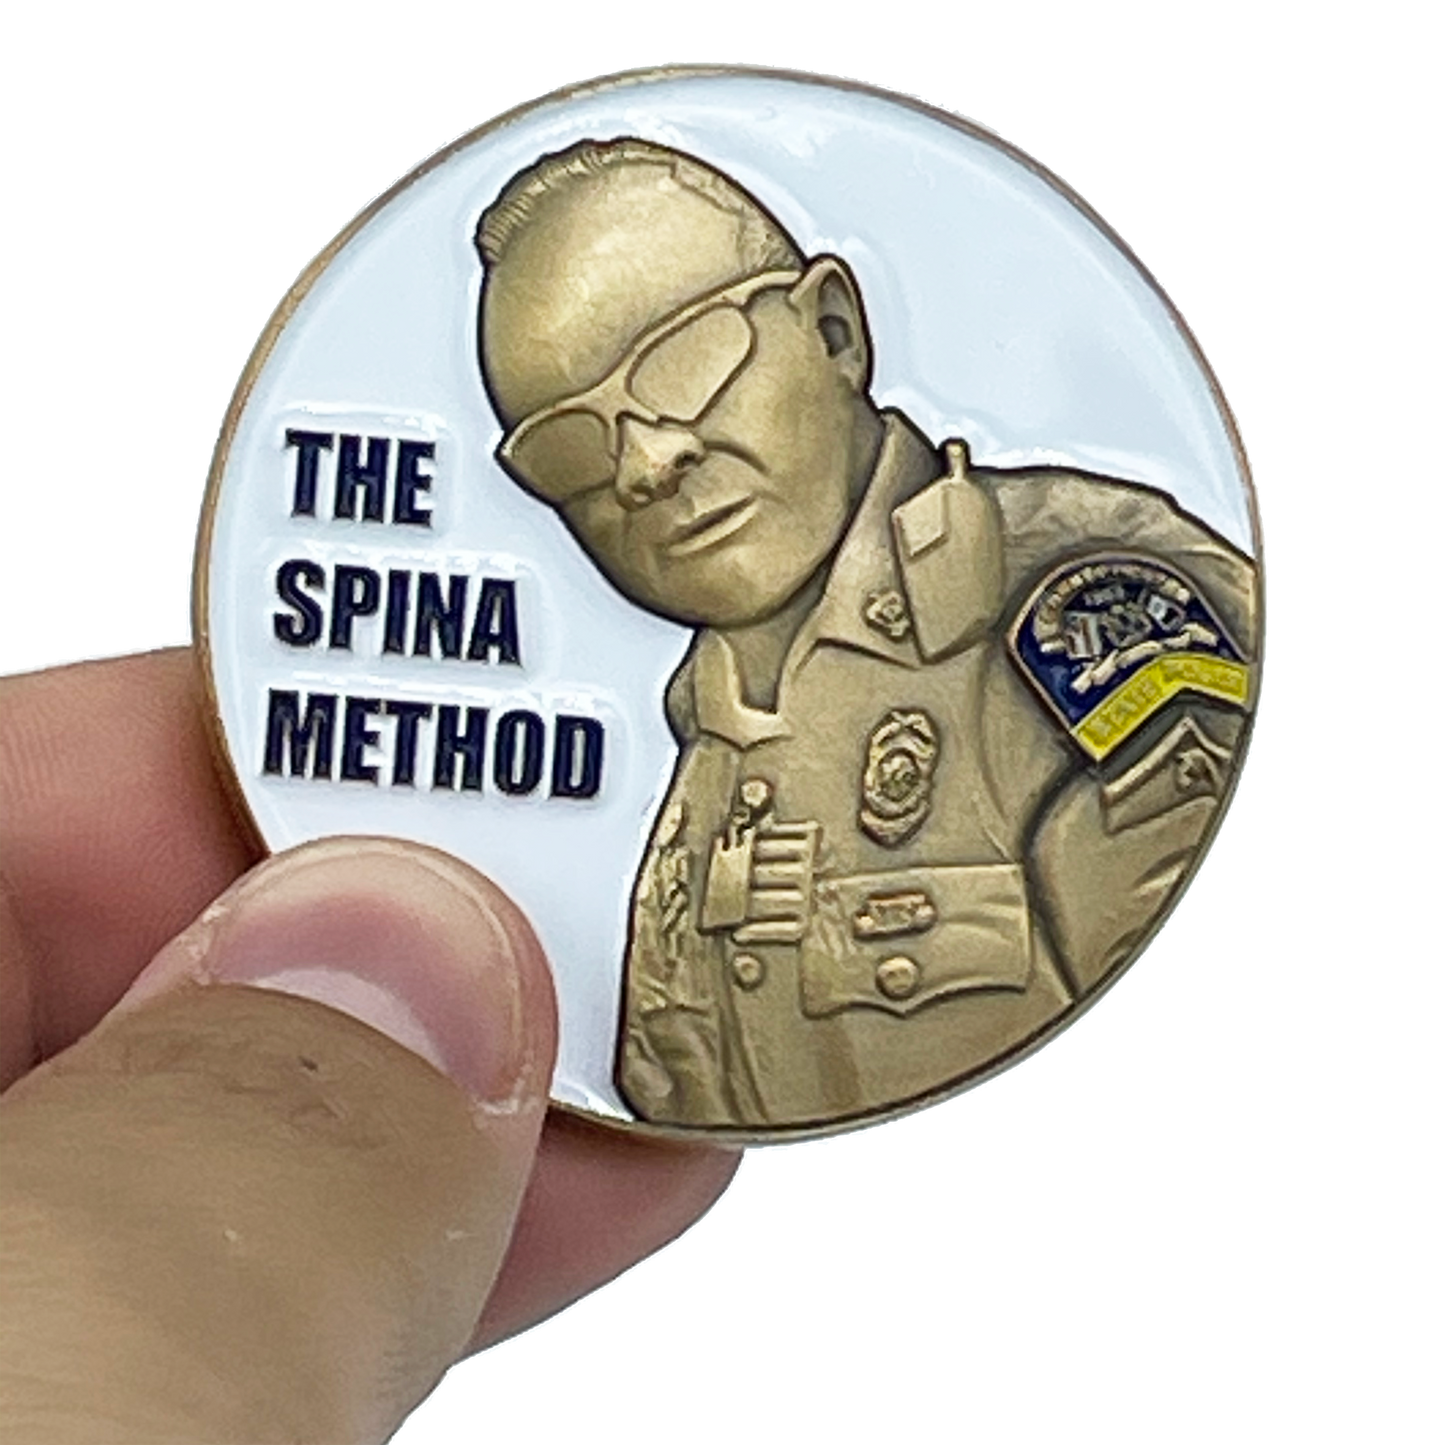 BL9-010 CSP Version 6 Spina Method Communications Challenge Coin inspired by Connecticut State Police CT Trooper Matthew Spina